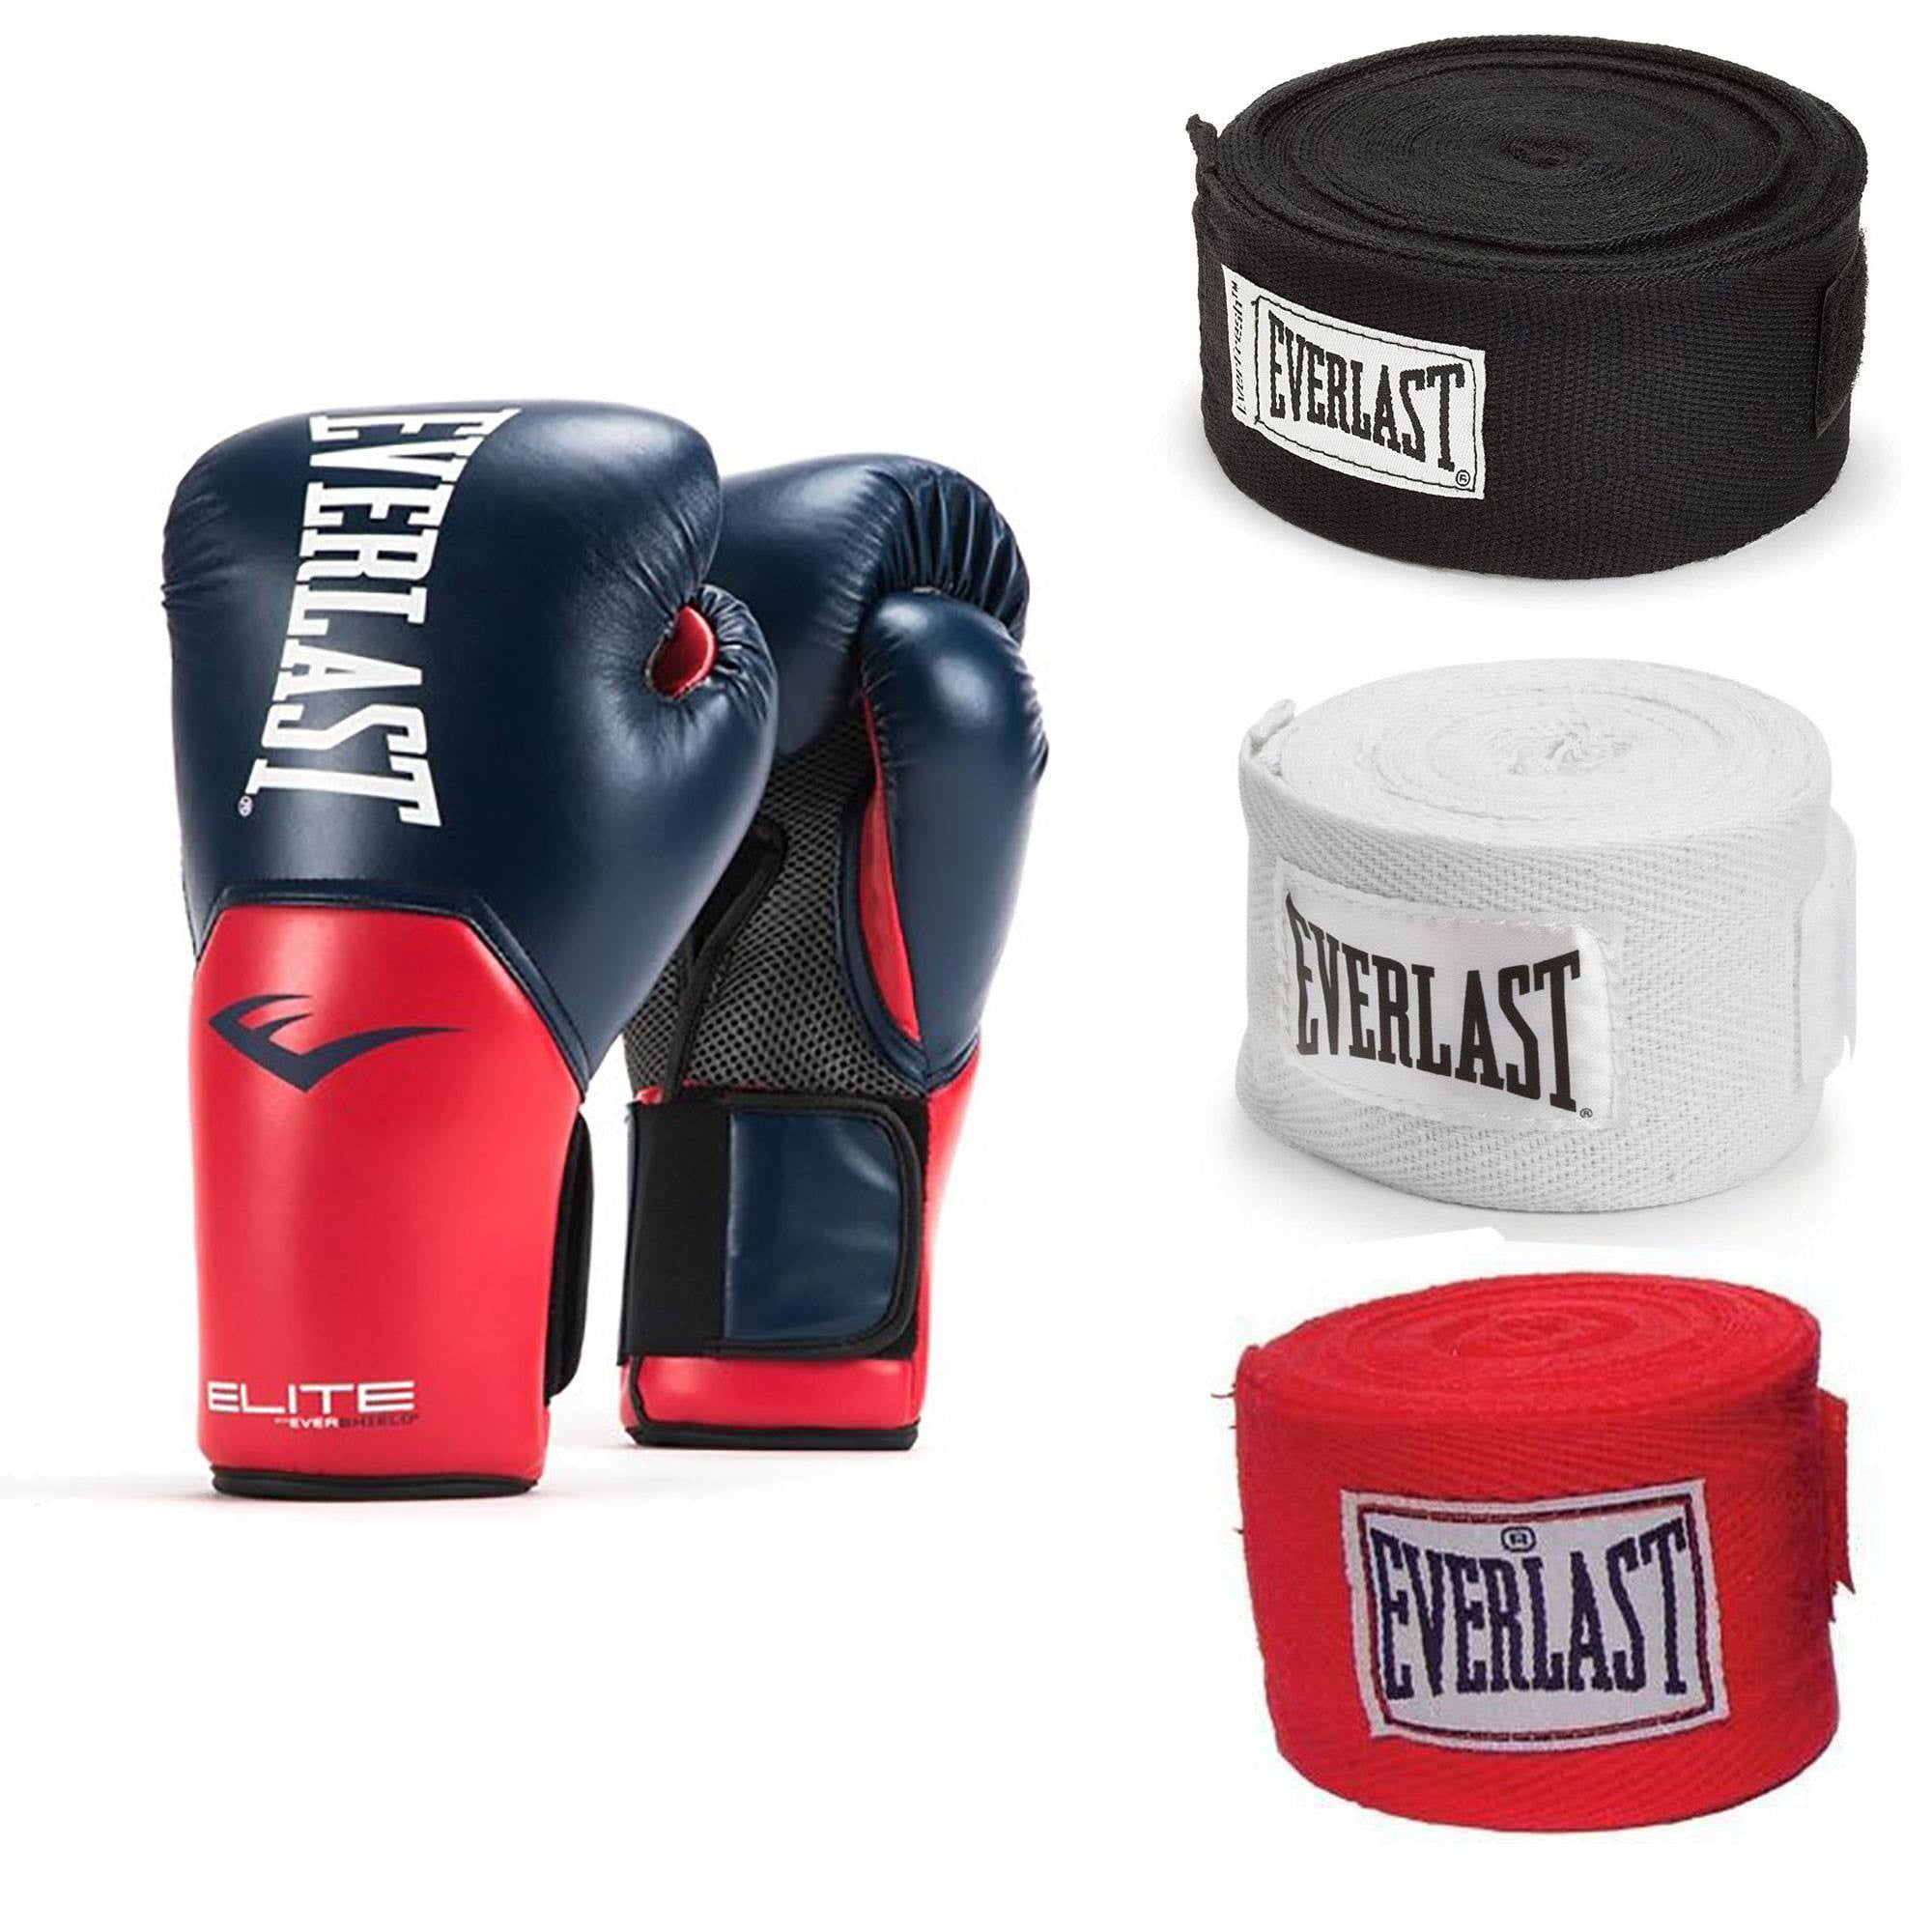 Red US NEW Everlast Pro Style Workout Training Boxing Gloves Size 16 Oz 